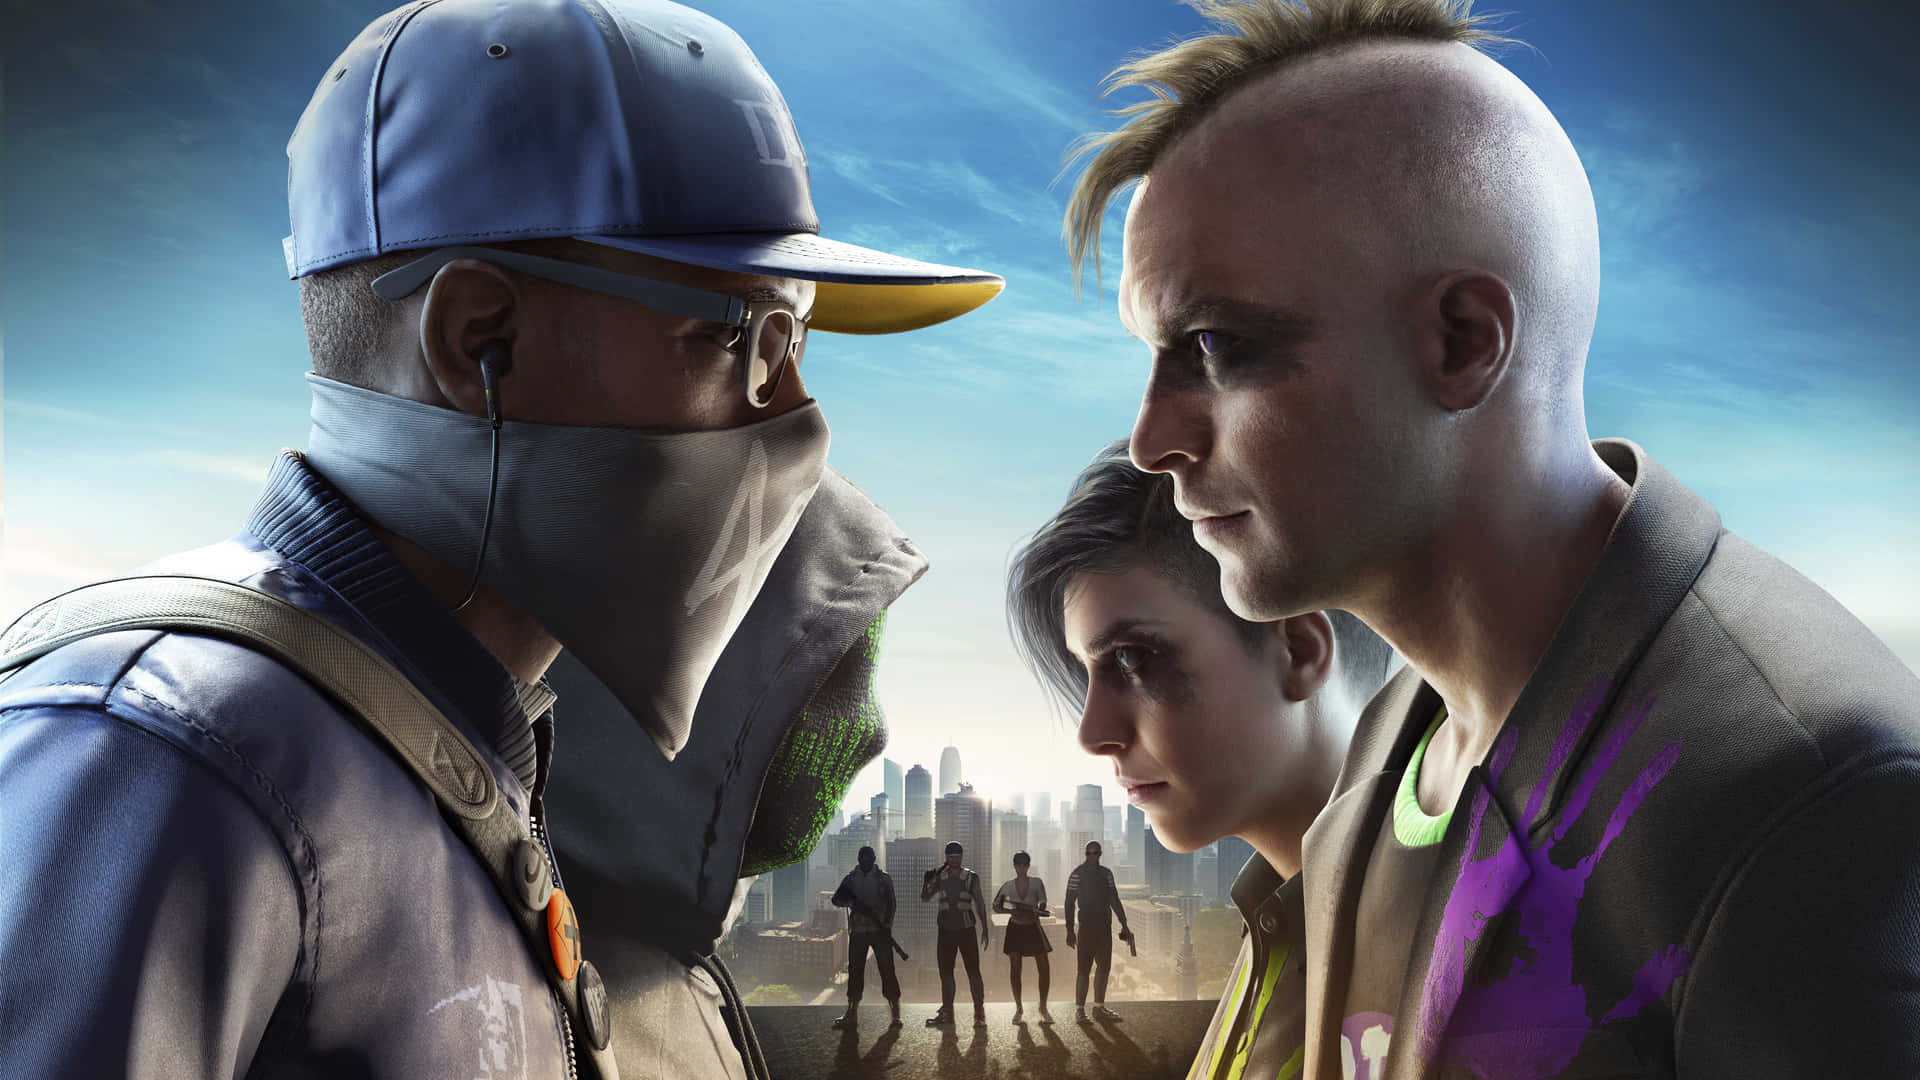 Watch Dogs 2 Pc Pc Game Wallpaper